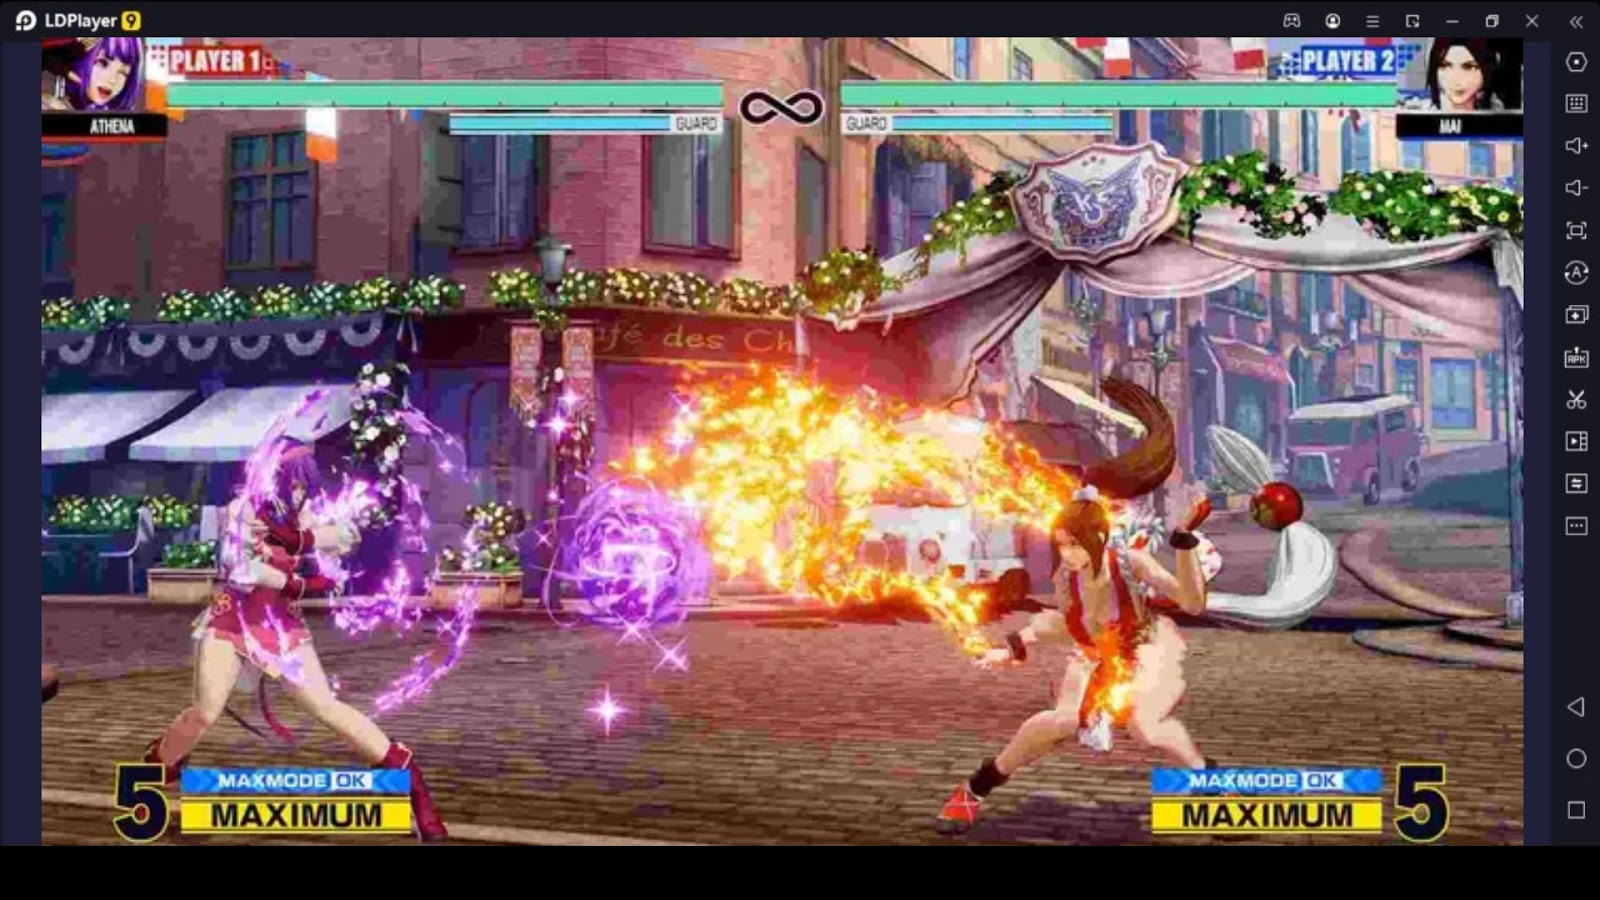 The King of Fighters ARENA Beginners Guide – Combat System, Ranked Mode,  Currencies Explained